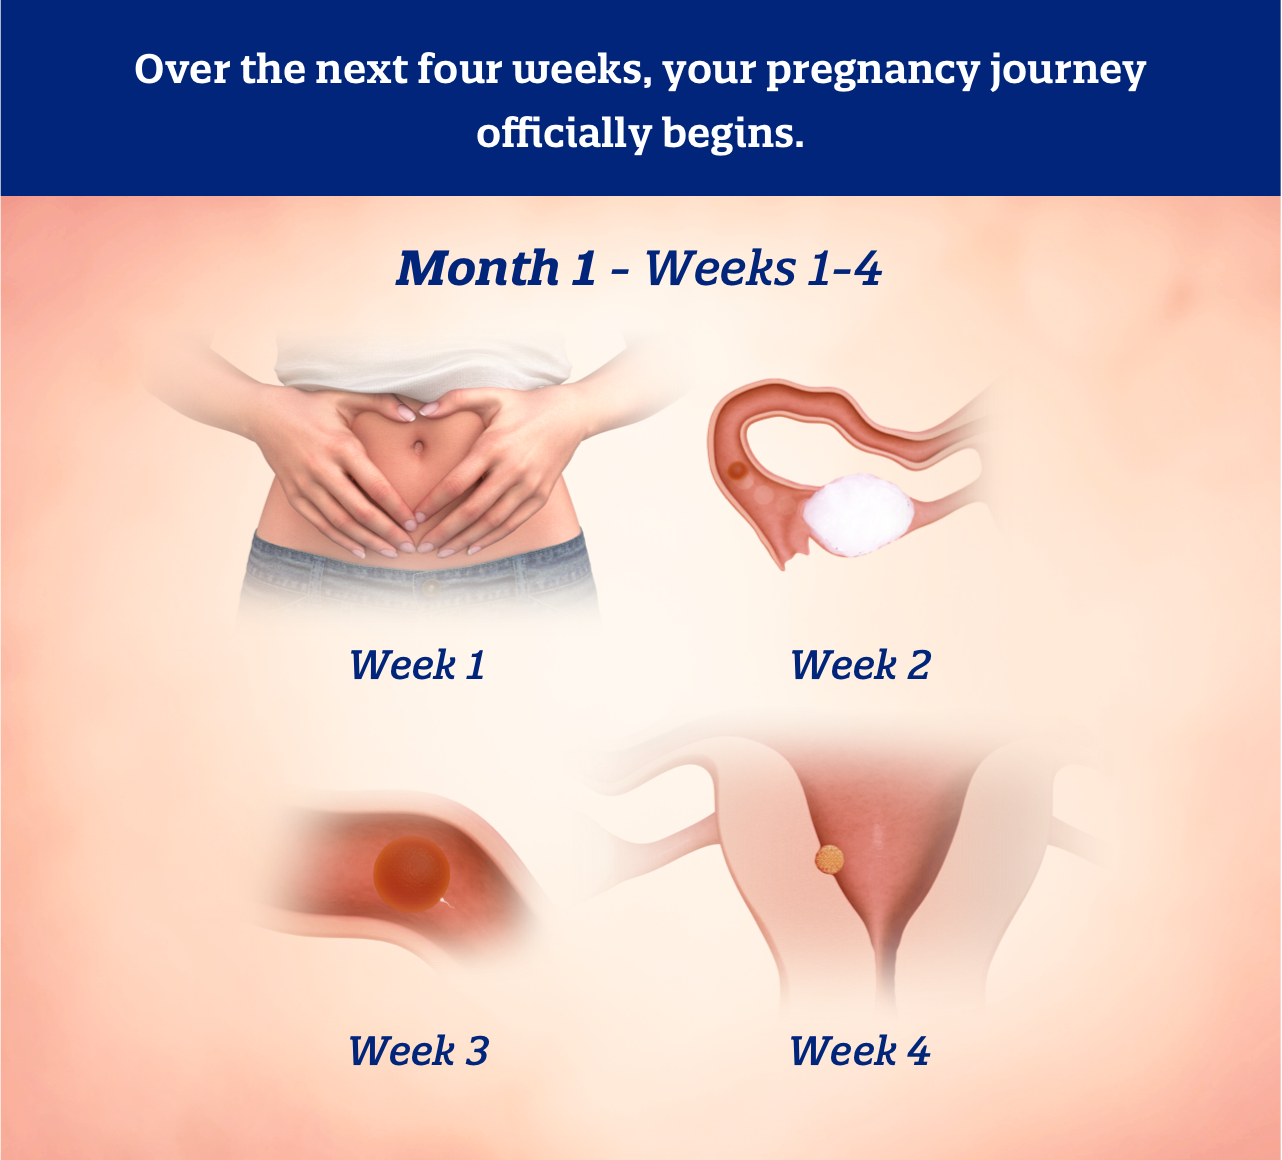 Month 1 weeks 1-4: Over the next four weeks, your pregnancy journey officially begins.